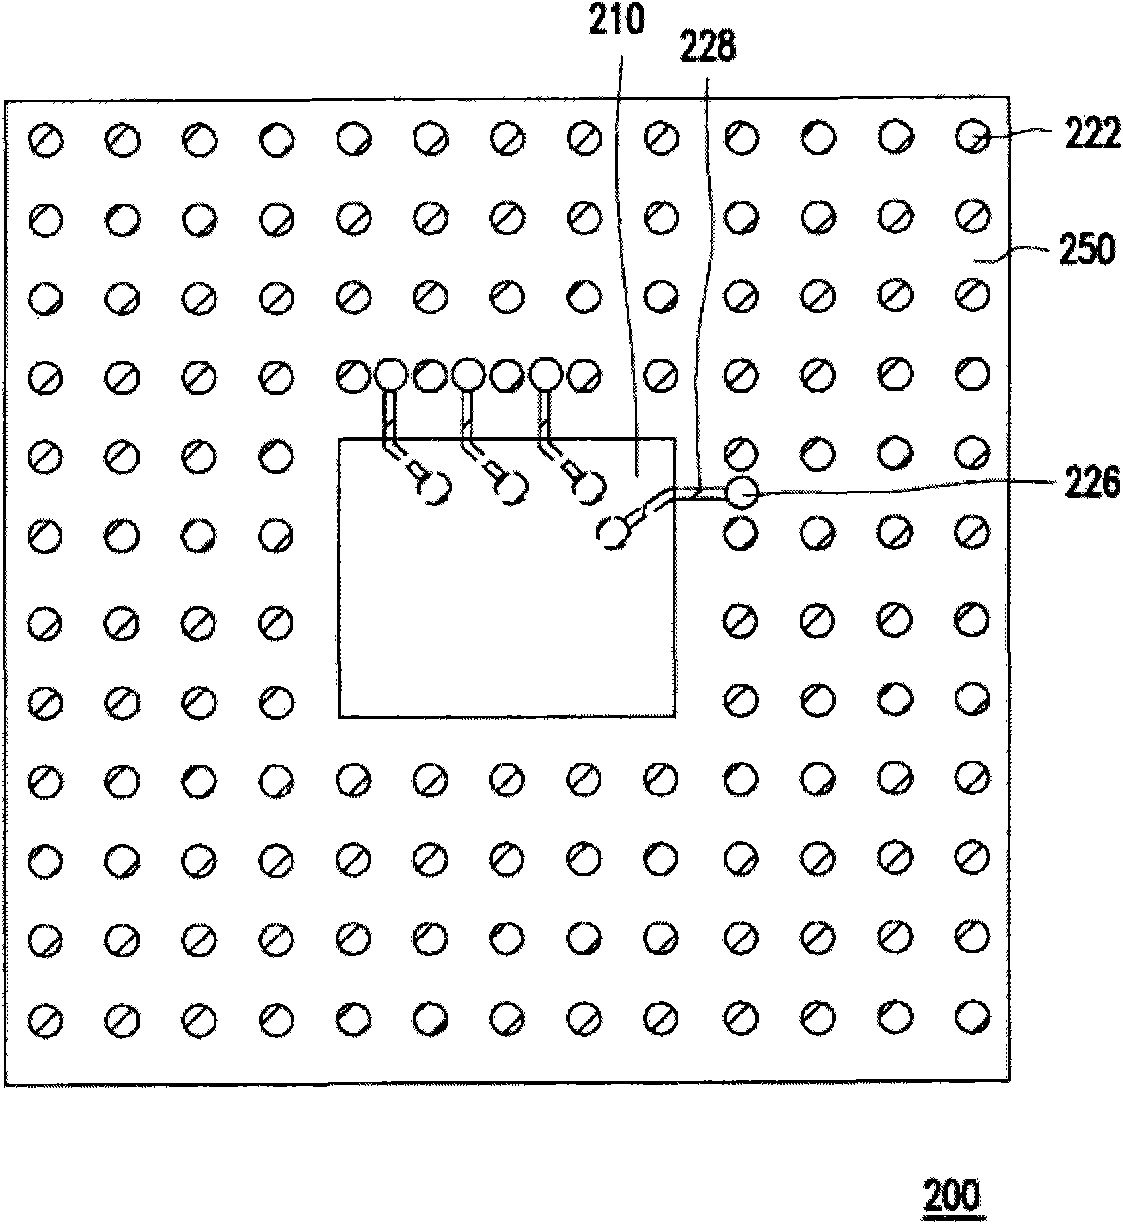 Semiconductor packaging structure and semiconductor packaging process